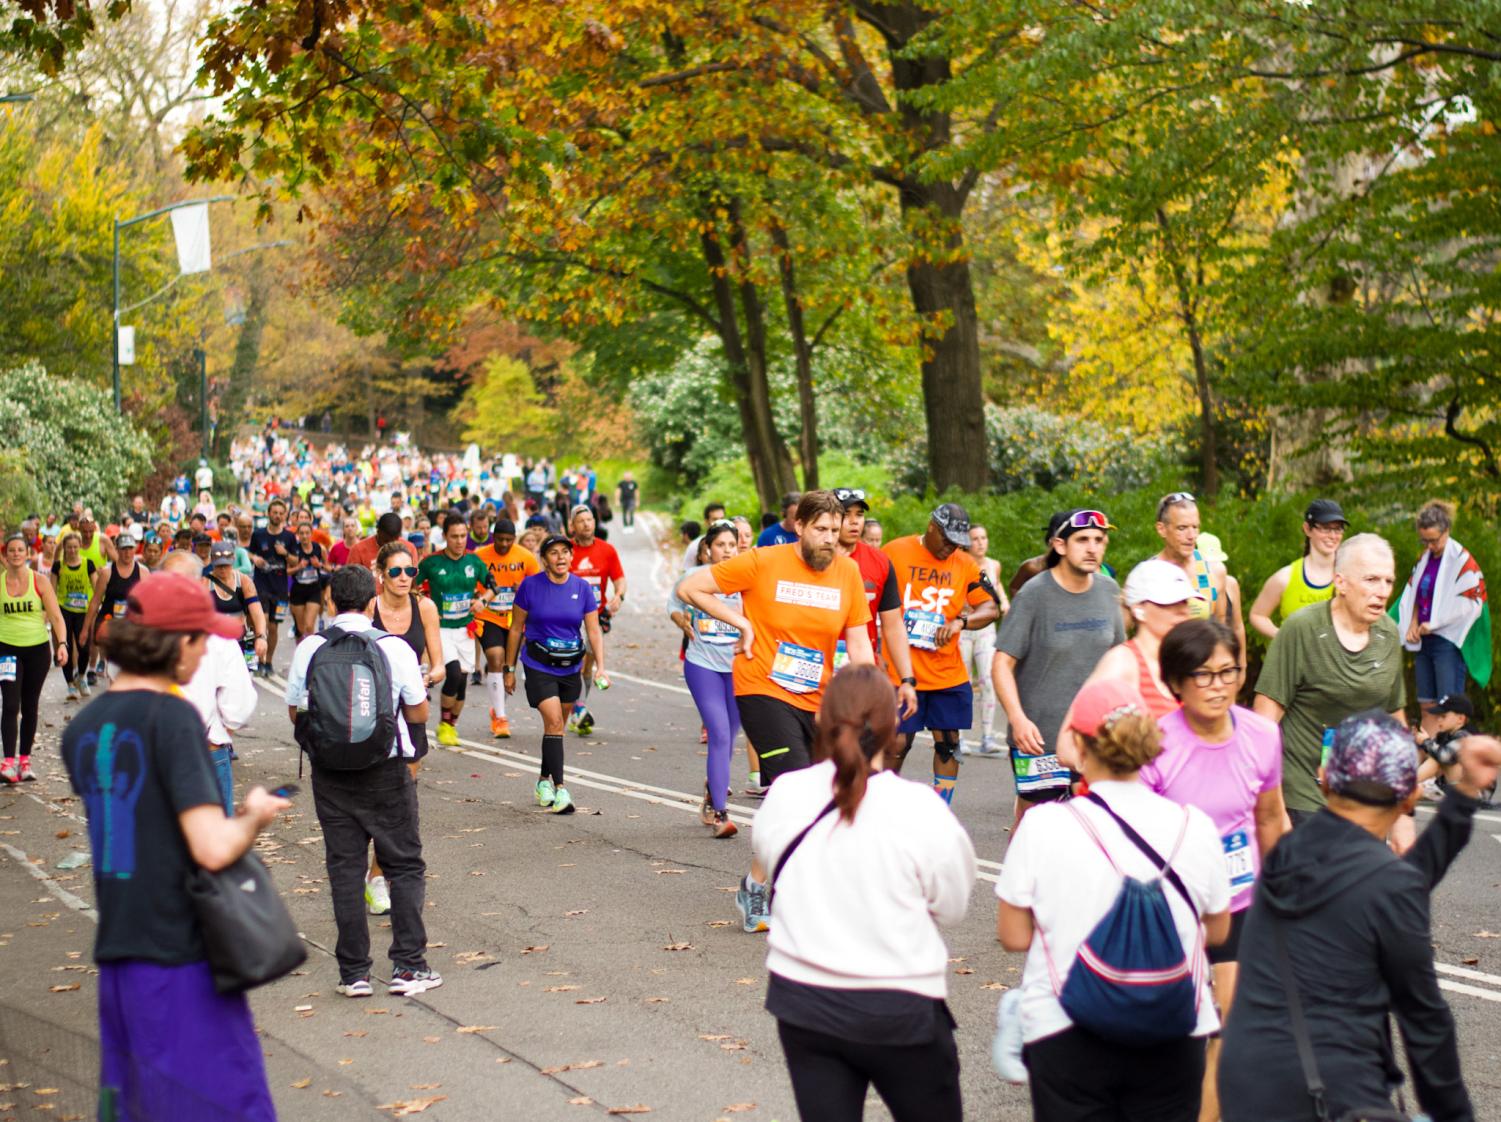 A big crowd of runners running on a concrete road. Most runners have orange colored shirts. To both sides of the runners are green trees, and some that have orange leaves.